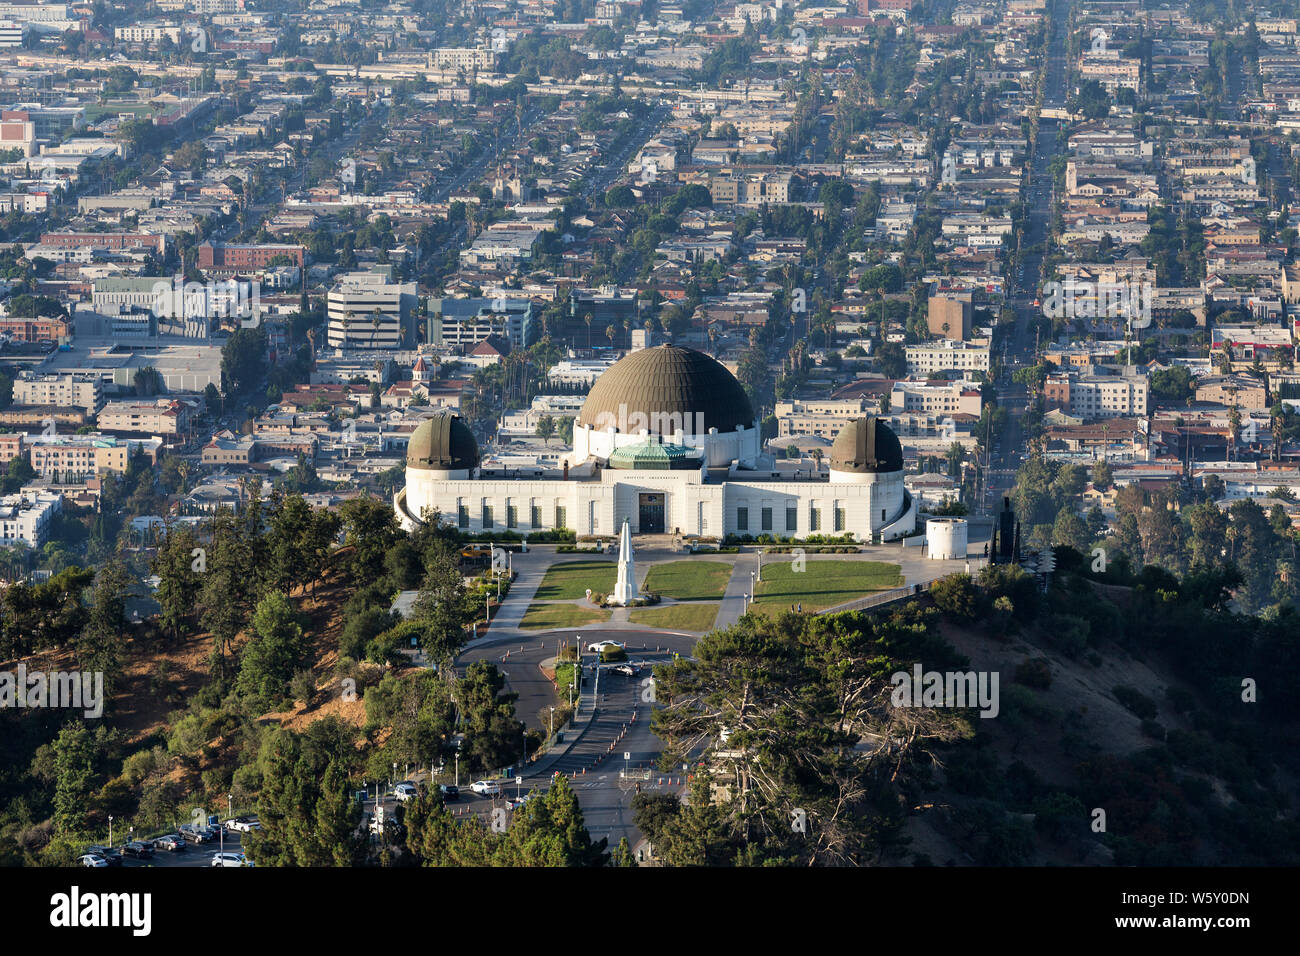 Los Angeles, California, USA - July 28, 2019:  Early morning view of Griffith Park Observatory with urban city streets and buildings in background. Stock Photo